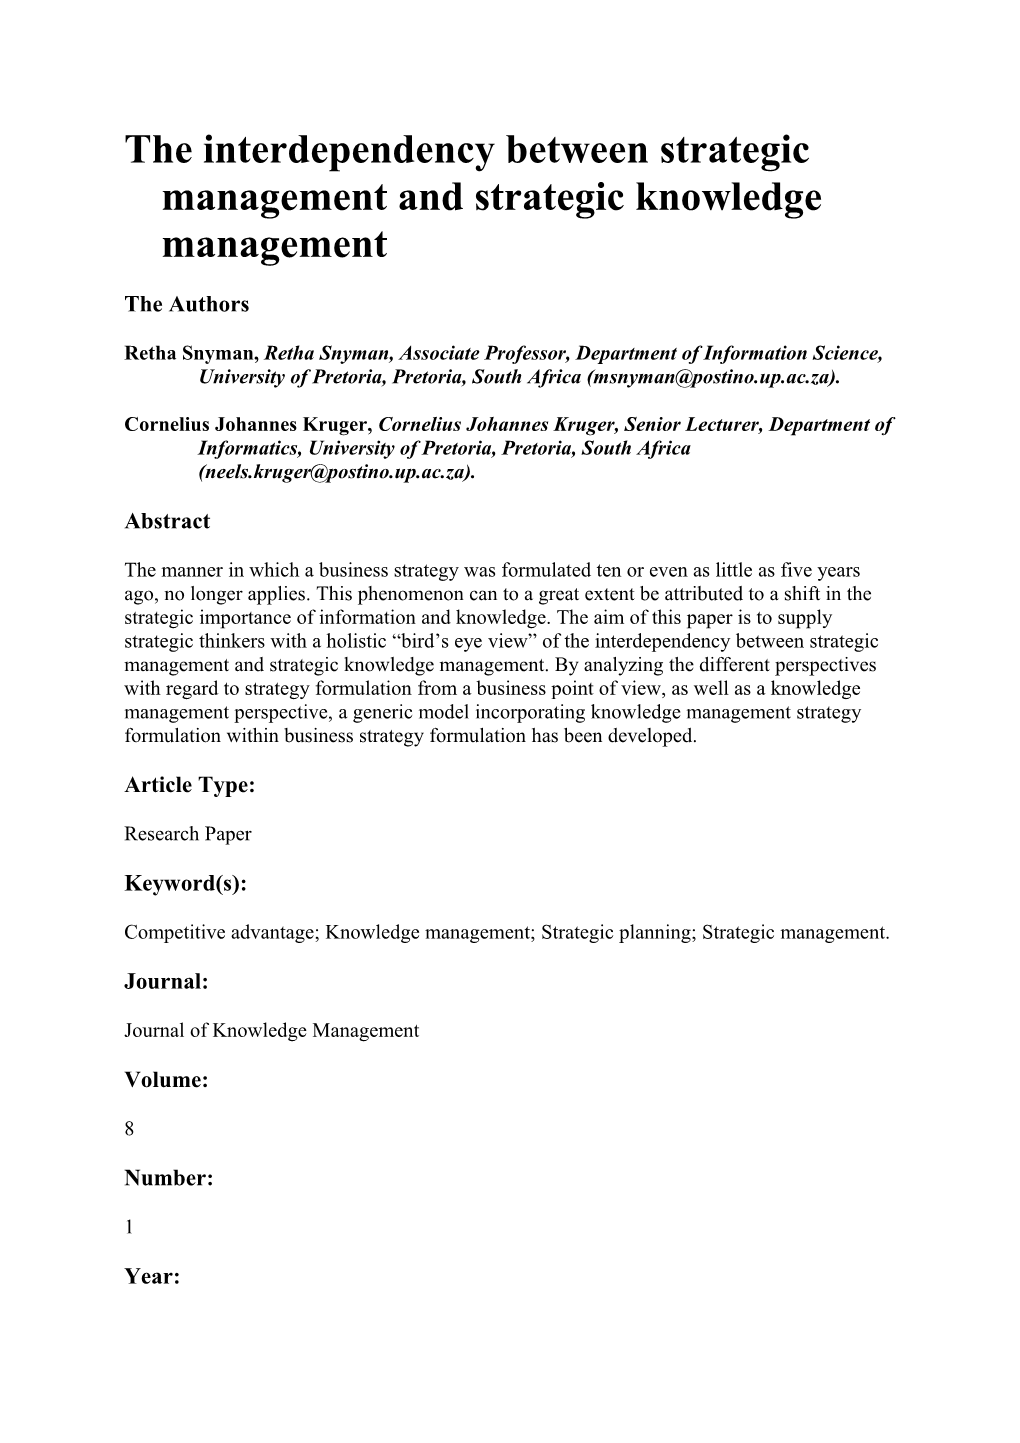 The Interdependency Between Strategic Management and Strategic Knowledge Management